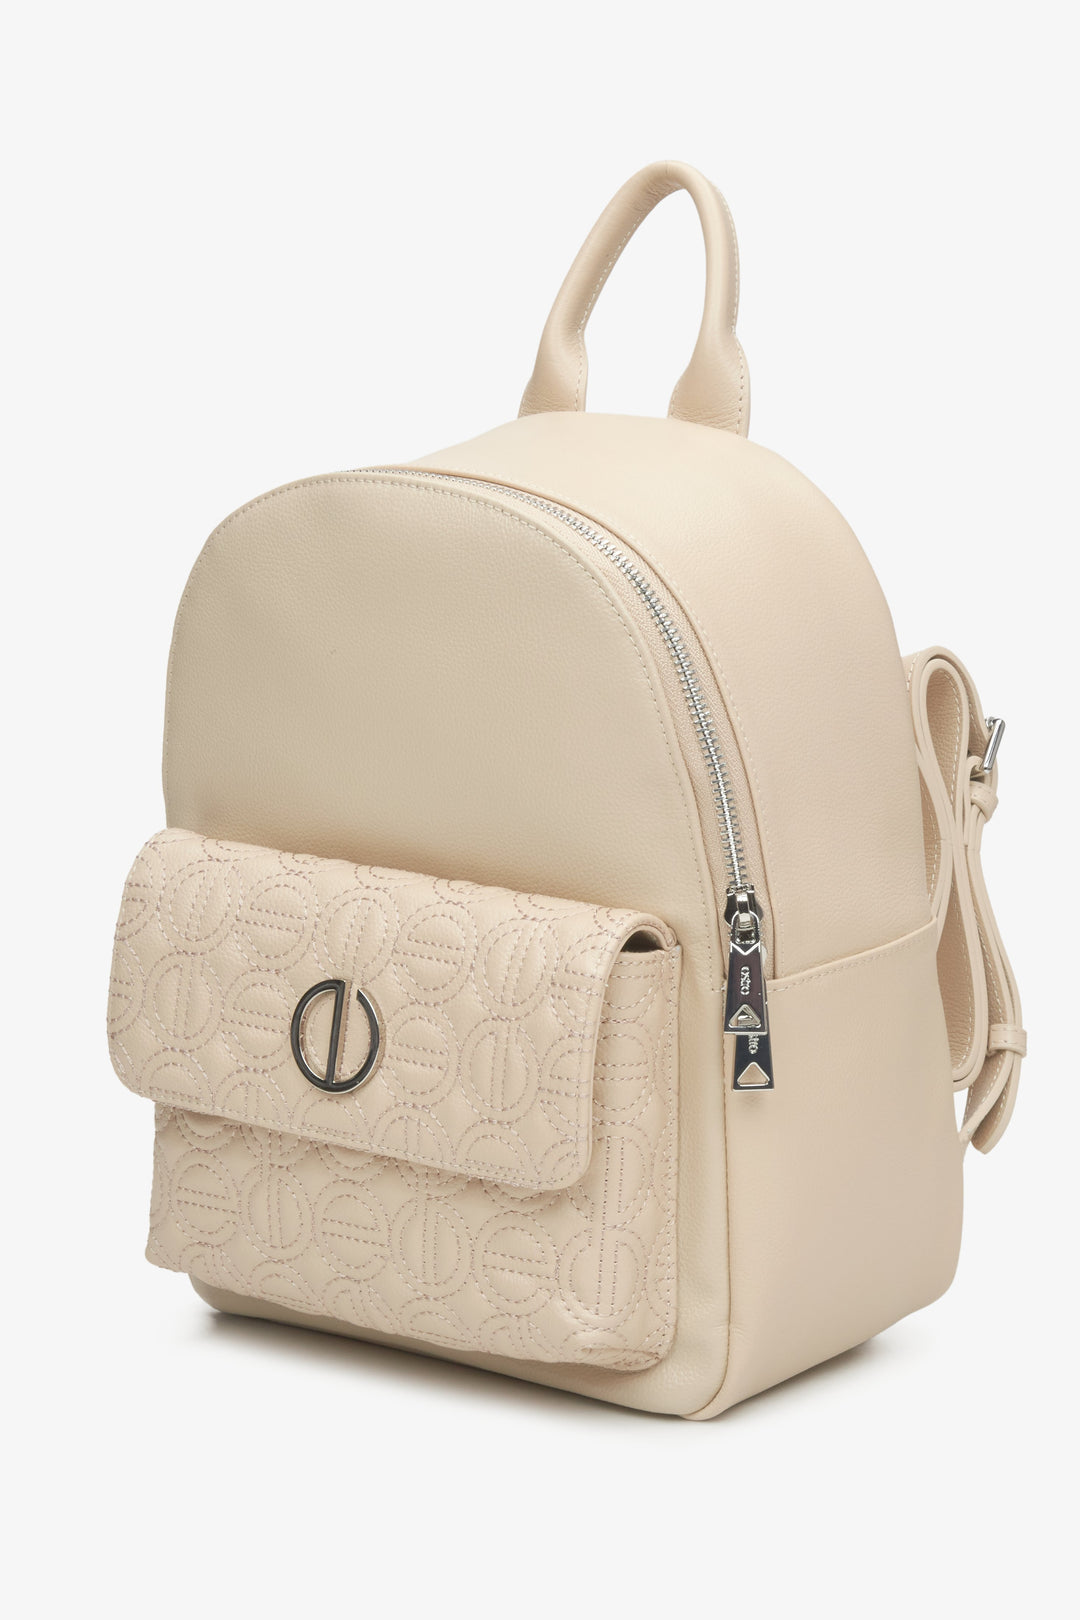 Women's light beige leather backpack with long straps by Estro.